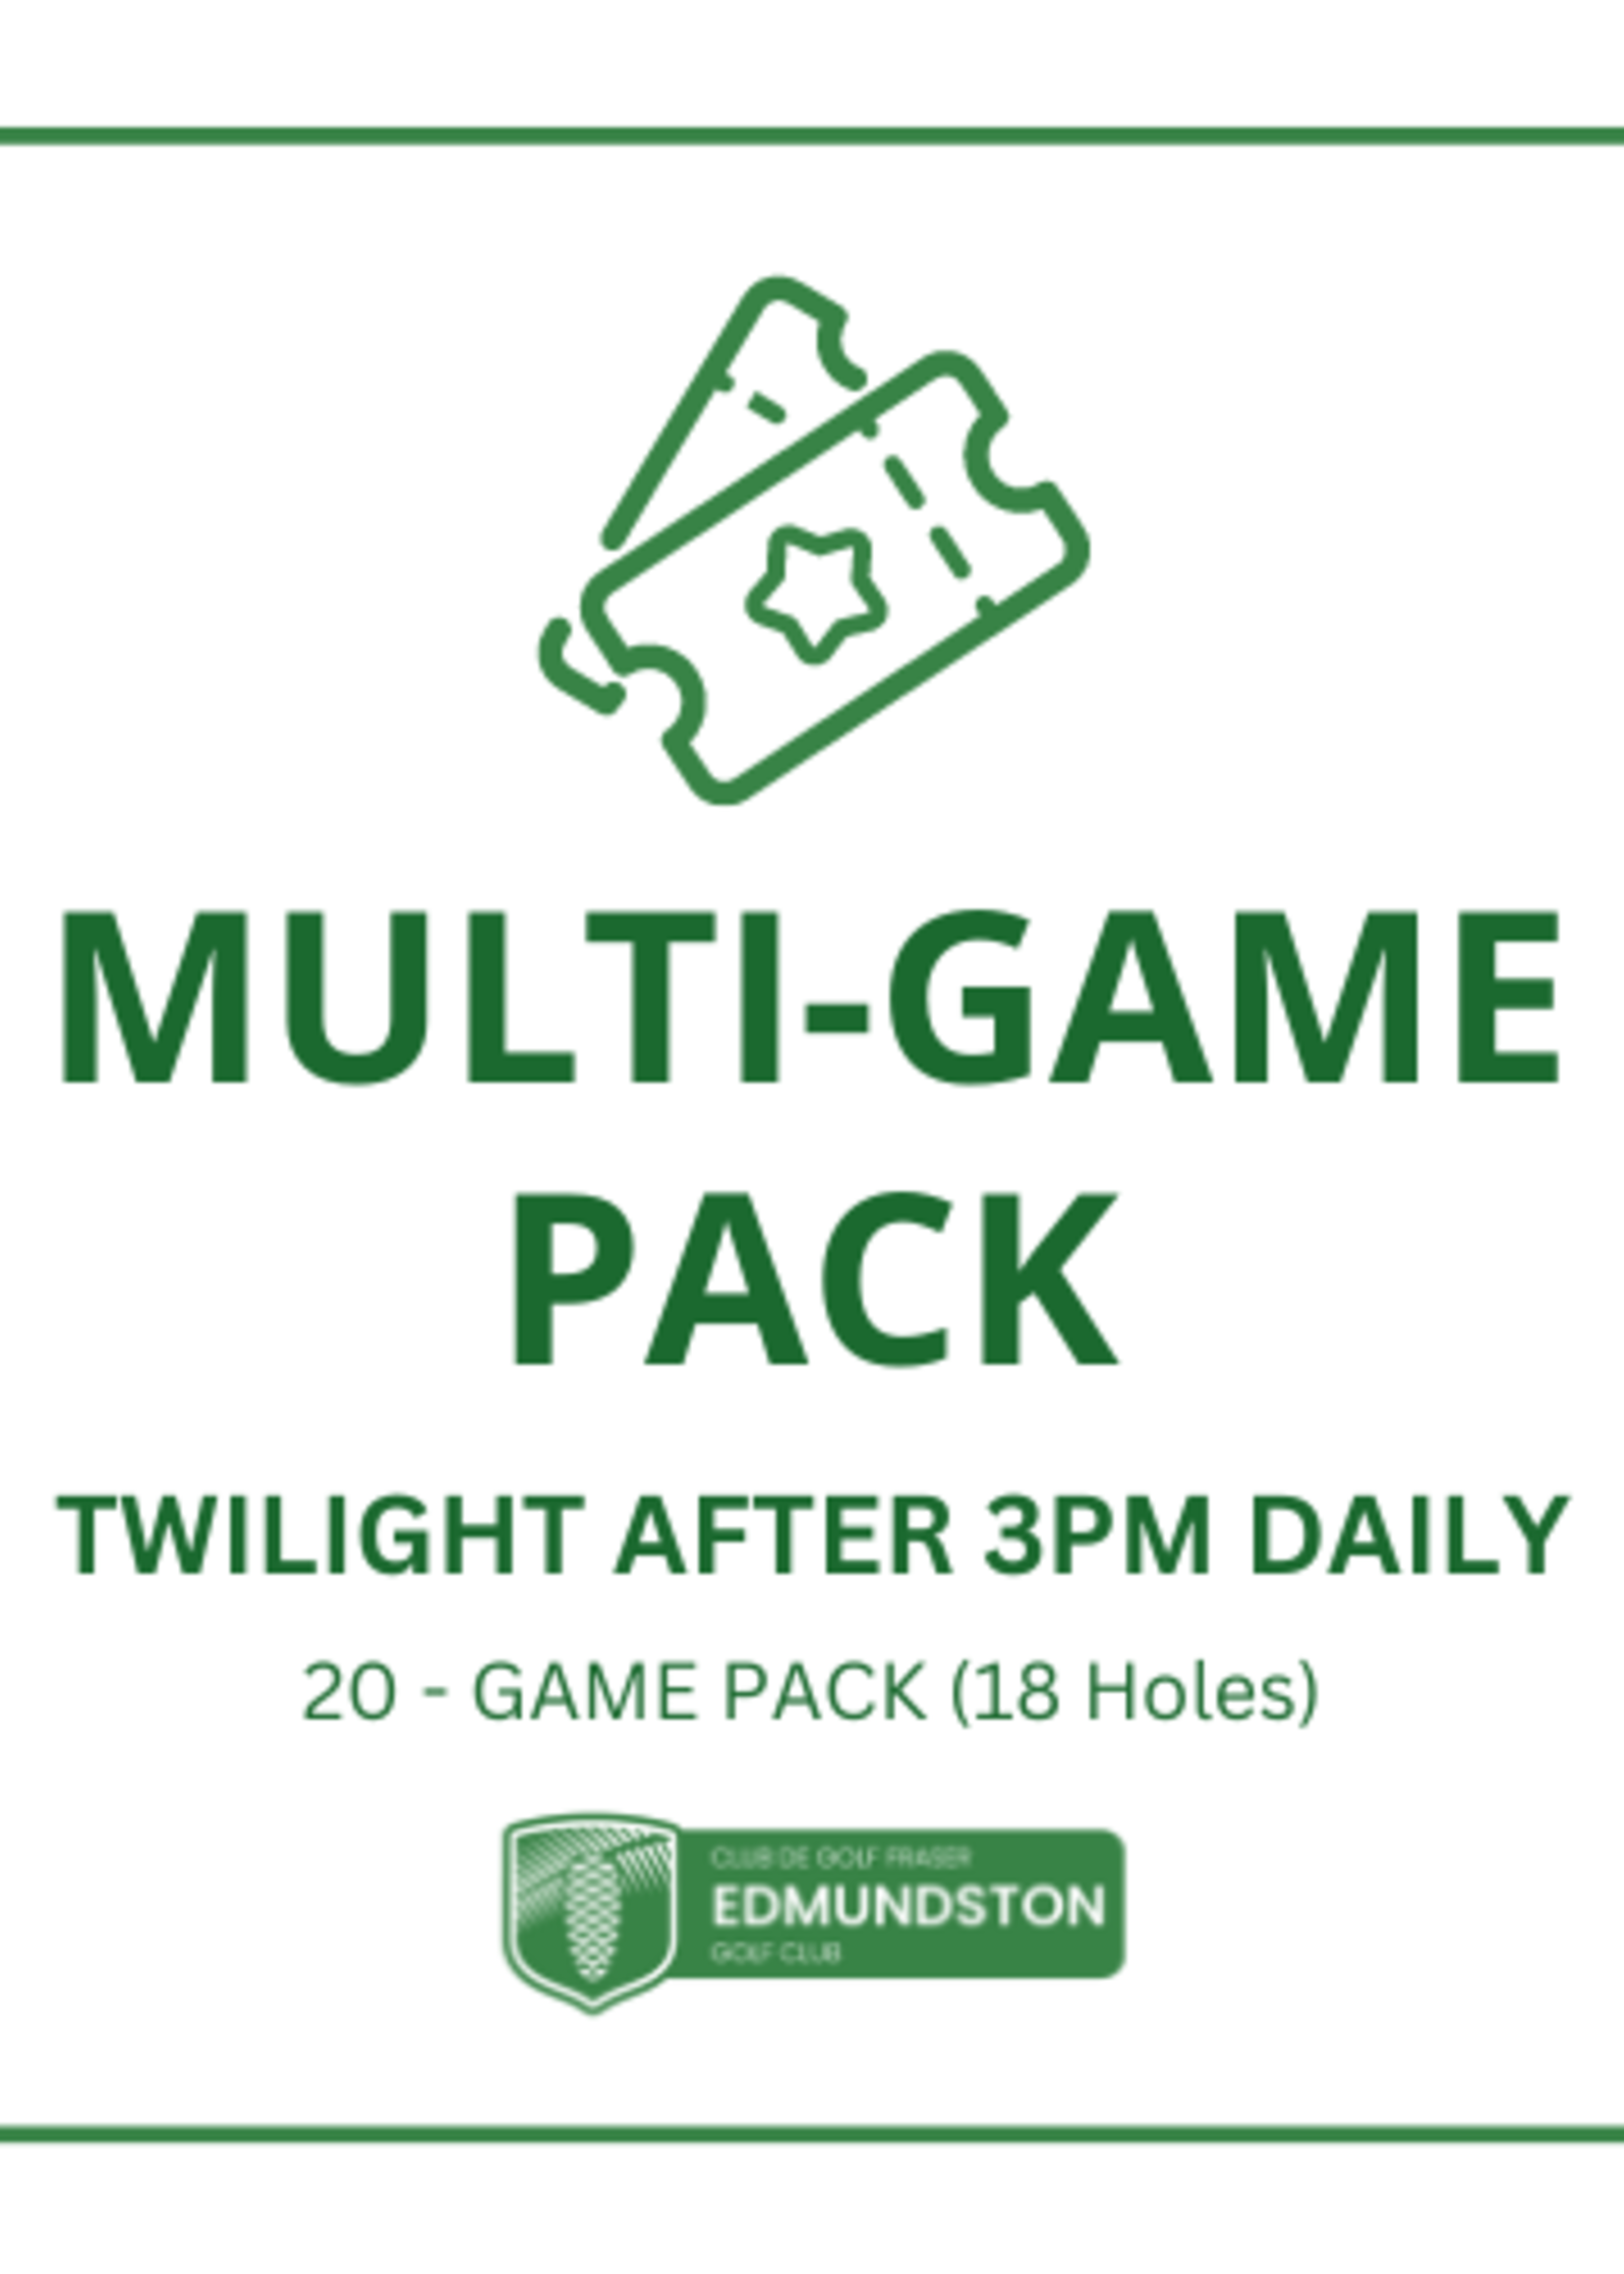 18 holes - 20-GAME PACK TWILIGHT AFTER 3PM